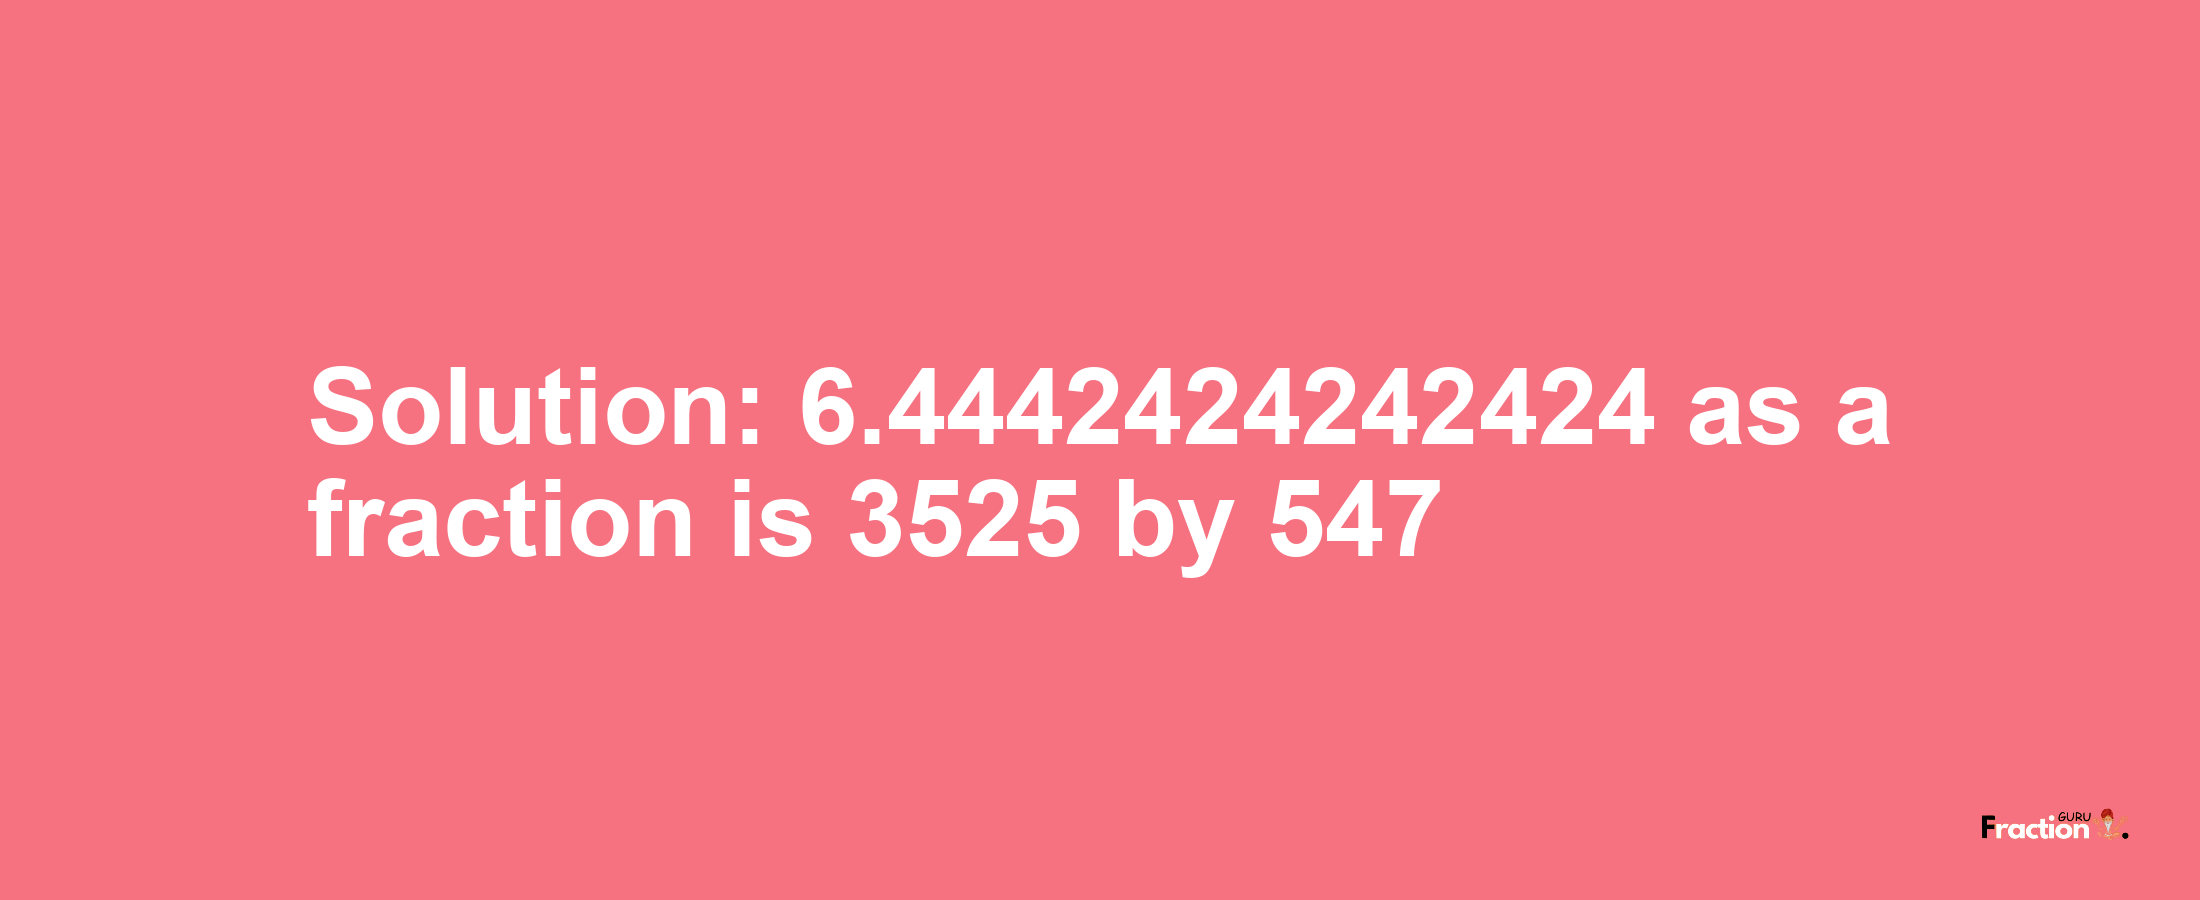 Solution:6.4442424242424 as a fraction is 3525/547